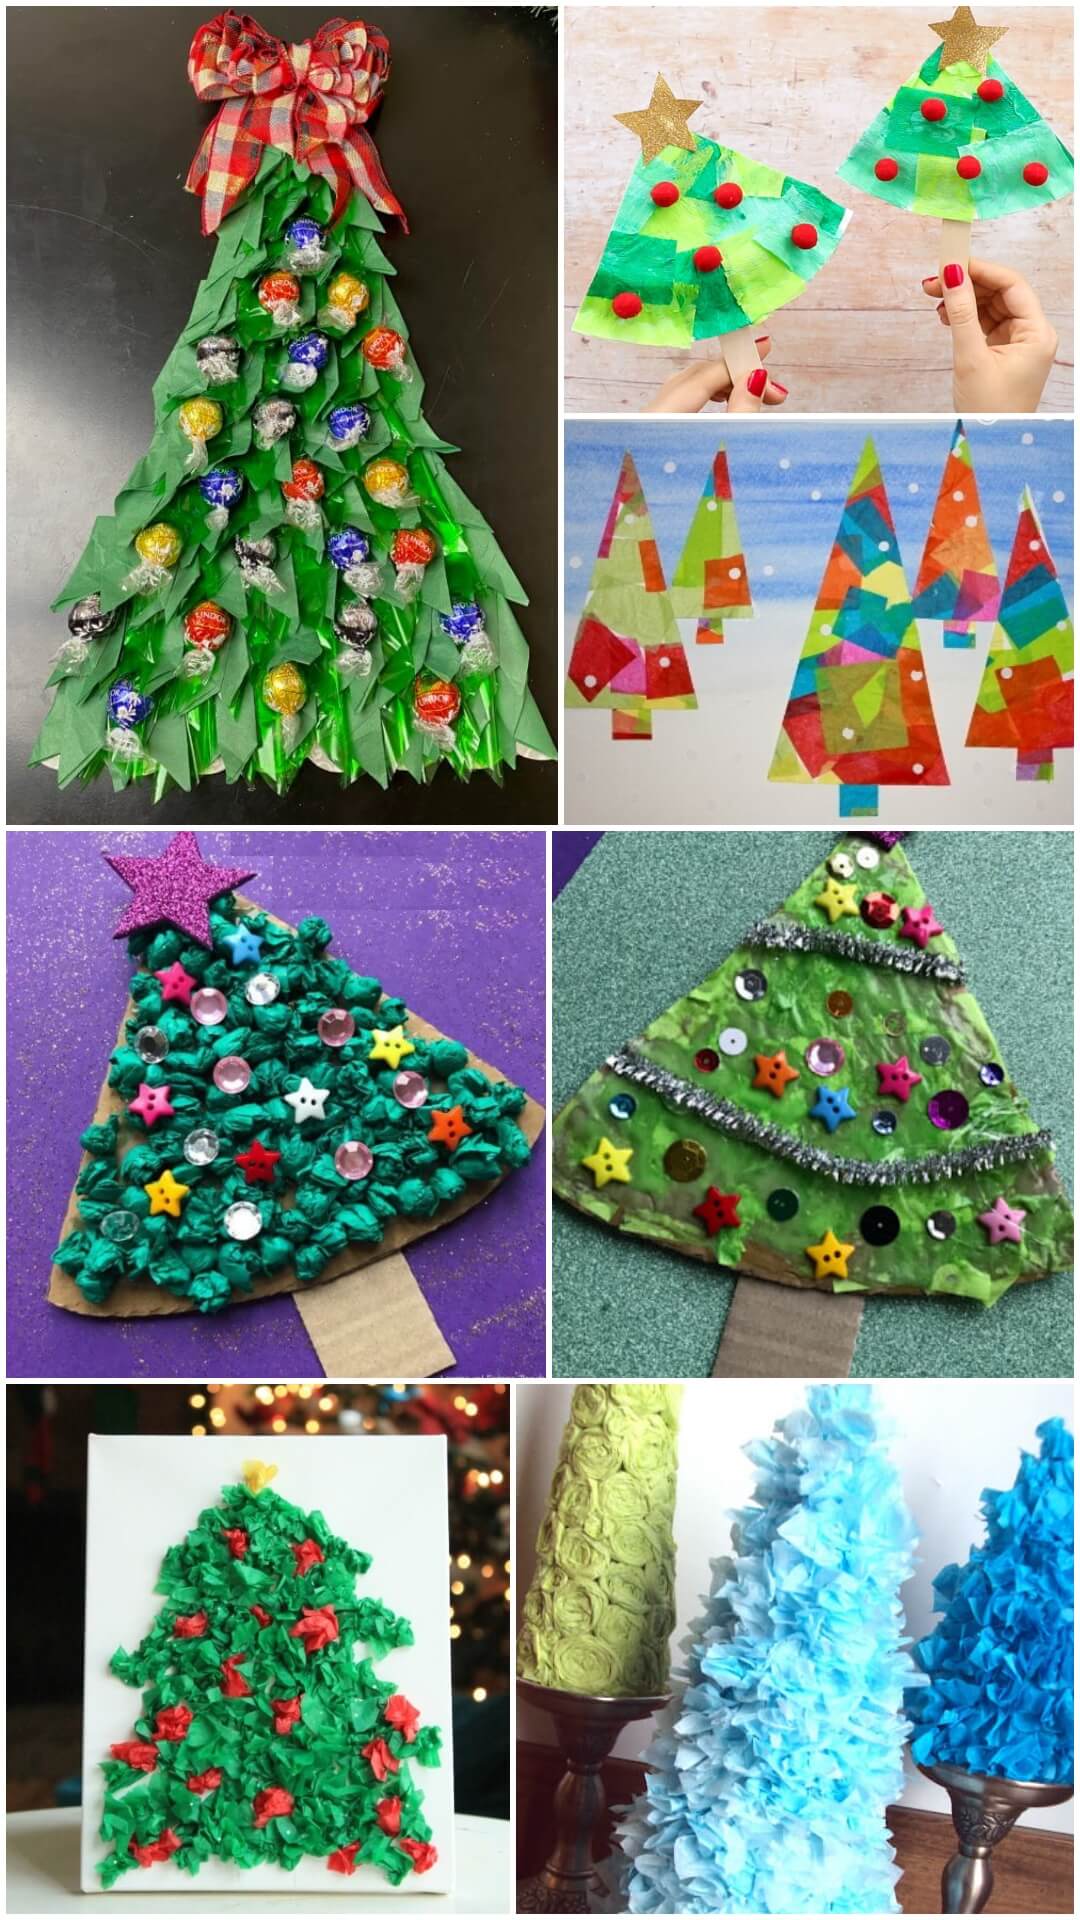 Scrunched tissue paper Christmas tree